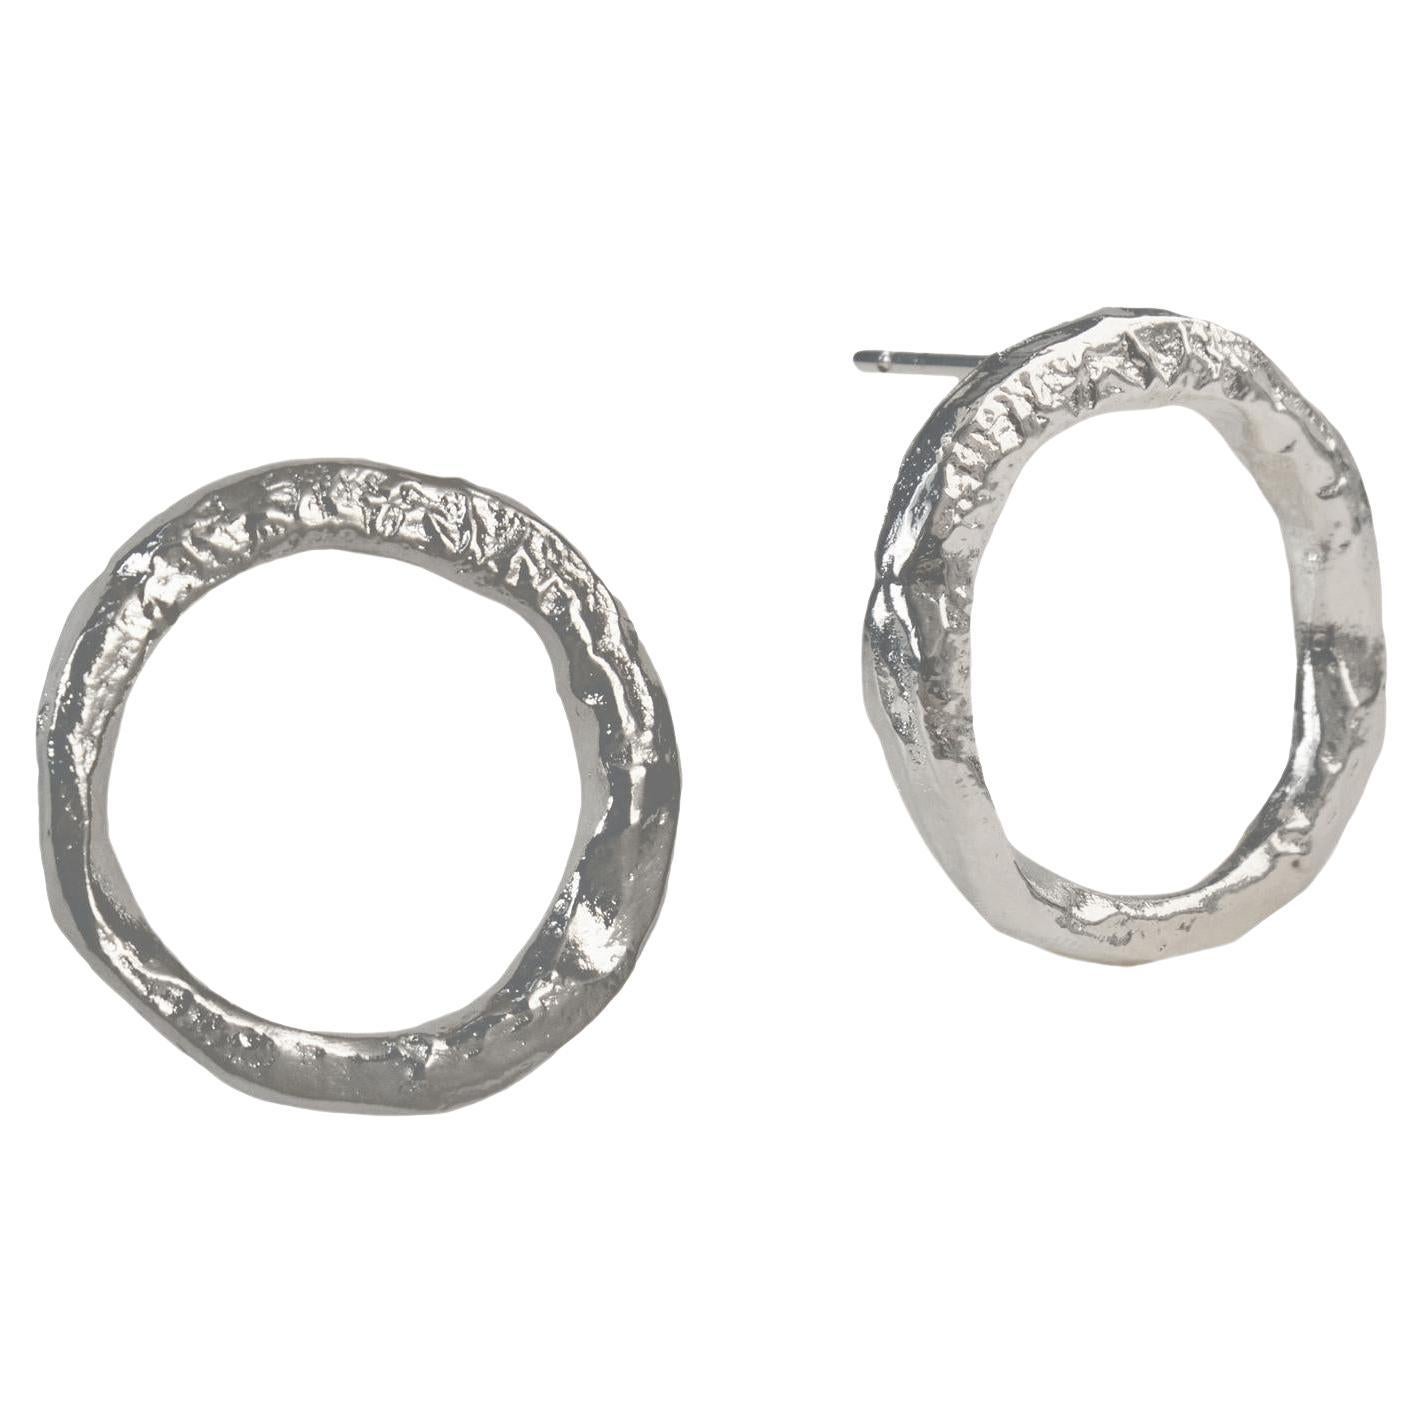 Full Circle Earrings are handcrafted from 24ct silver plated bronze For Sale